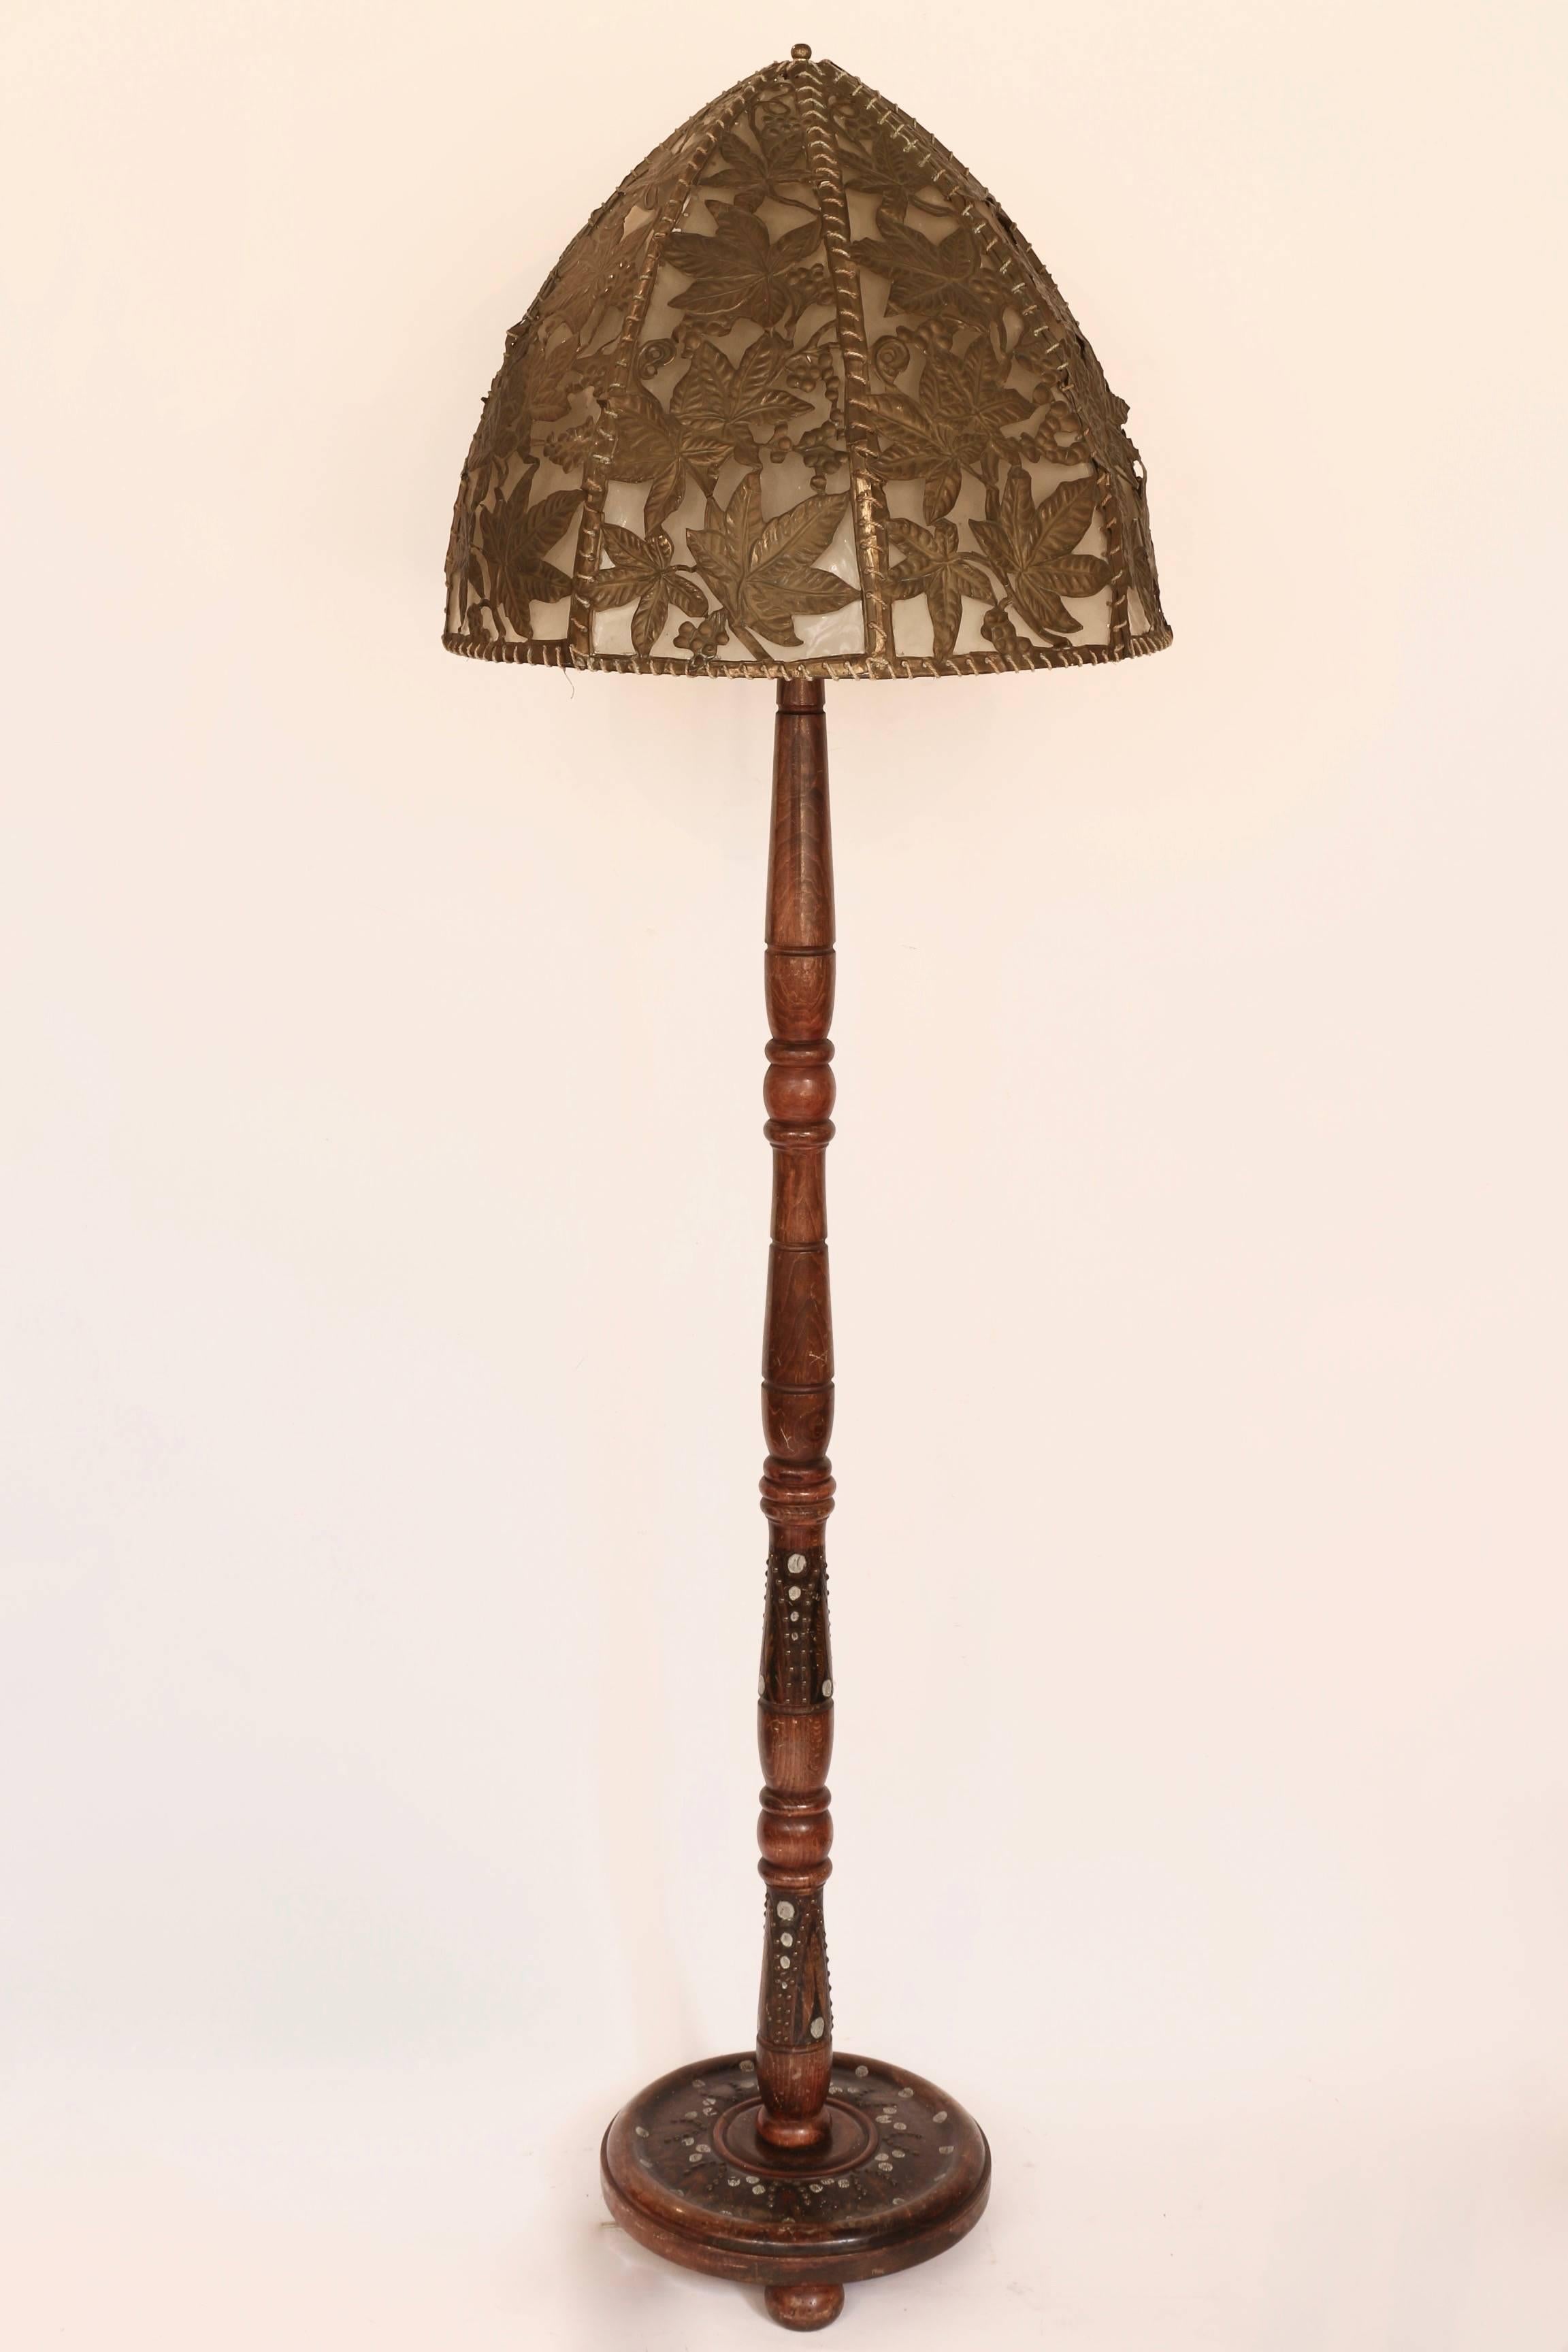 Floor lamp in turned wood with painted decorations
Original lampshade decorated with grape leafs.

Lampshade: 55 x H: 45 cm 21.65 x H: 17.72 inch
Base D: 33 cm 12.99 inch
Height: floor- under lampshade 134 cm 52.76 inch.